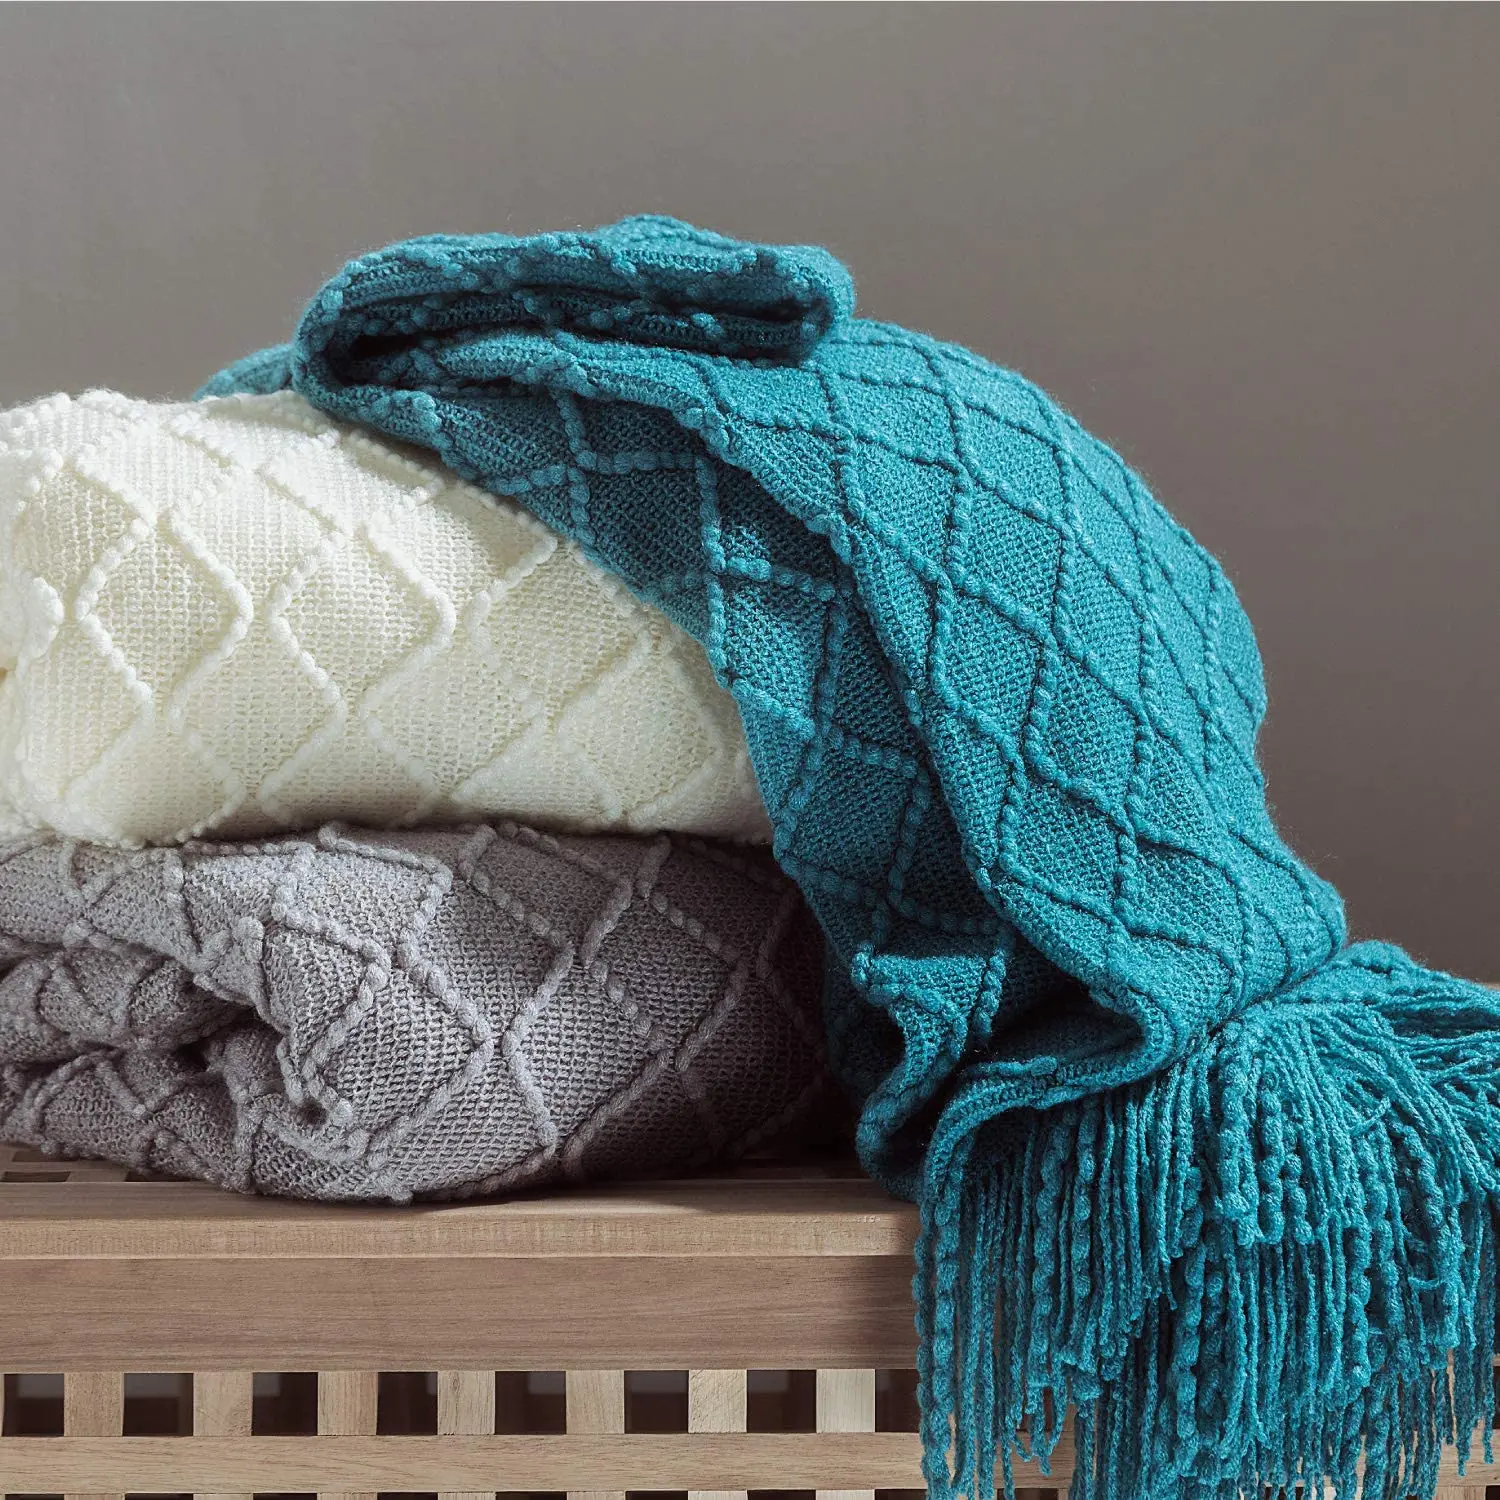 luxury throw Blanket Textured Solid Soft blanket for Sofa Couch Decorative Knitted Blanket for winter